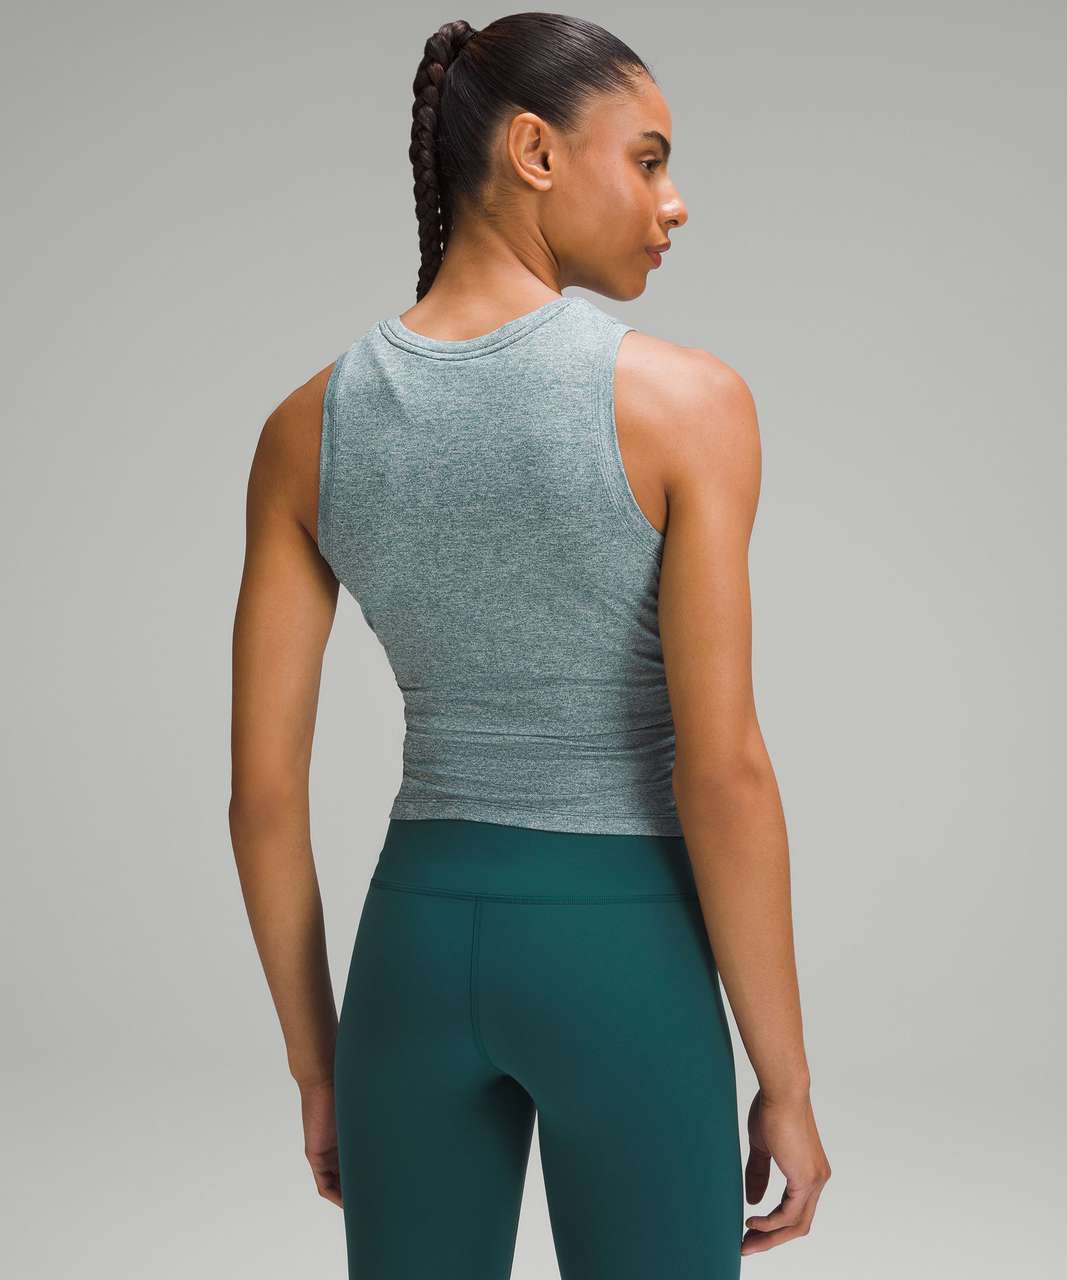 Lululemon License to Train Tight-Fit Tank Top - Heathered Storm Teal